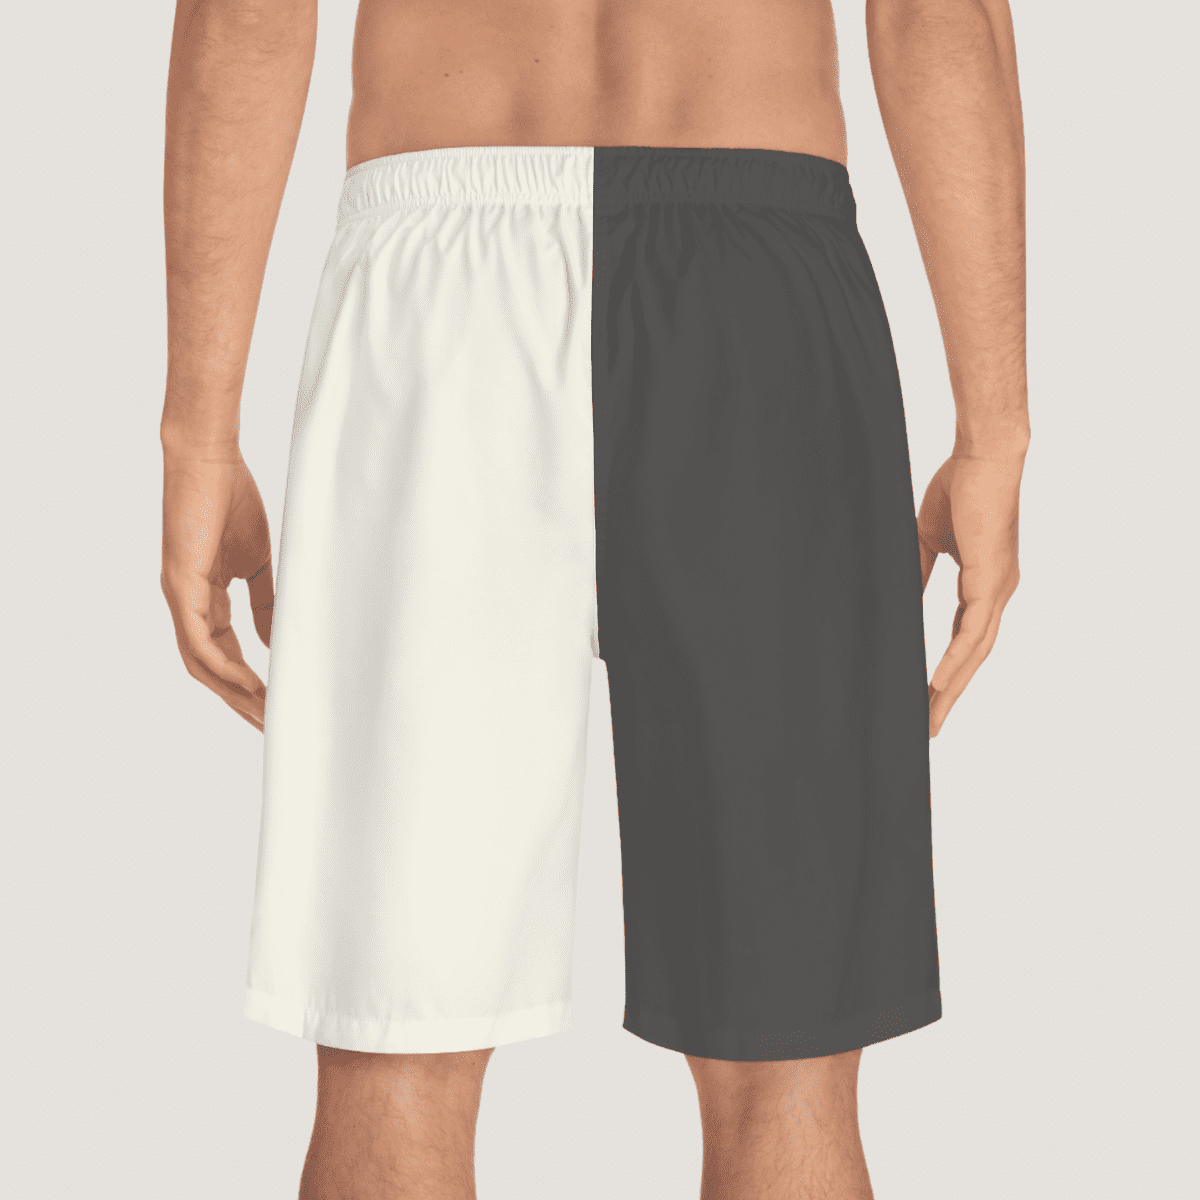 Men's Charcoal And Cream Board Shorts